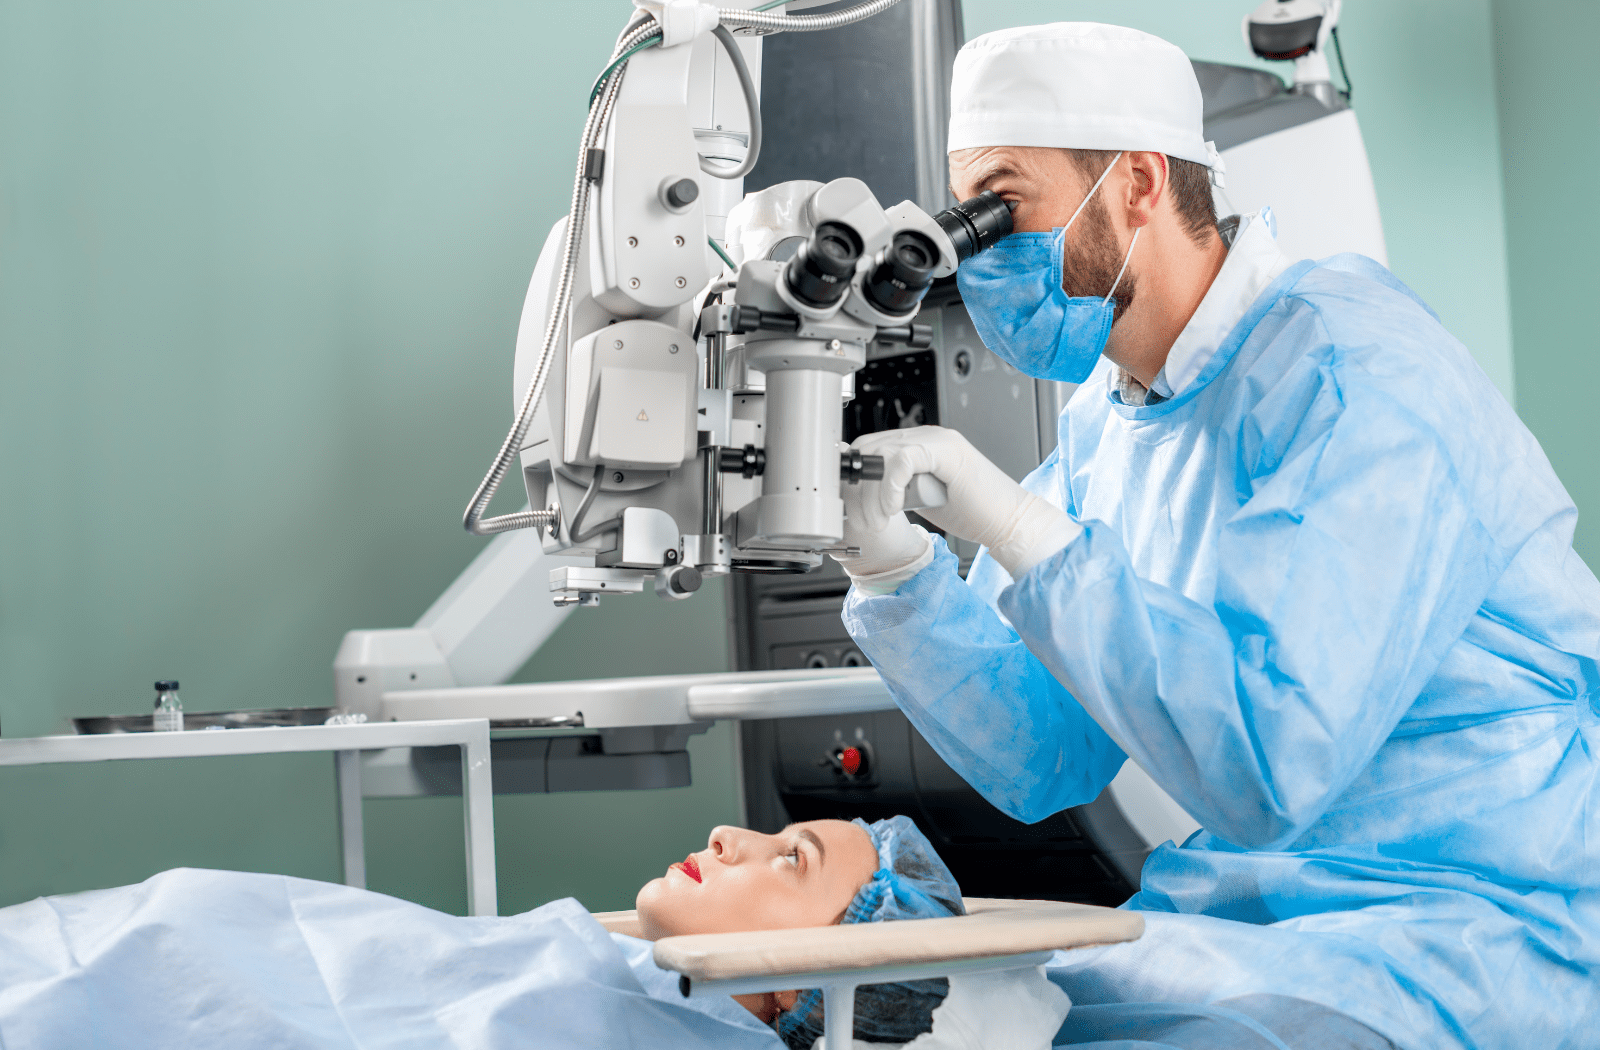 A male surgeon preparing for laser eye surgery on a female patient